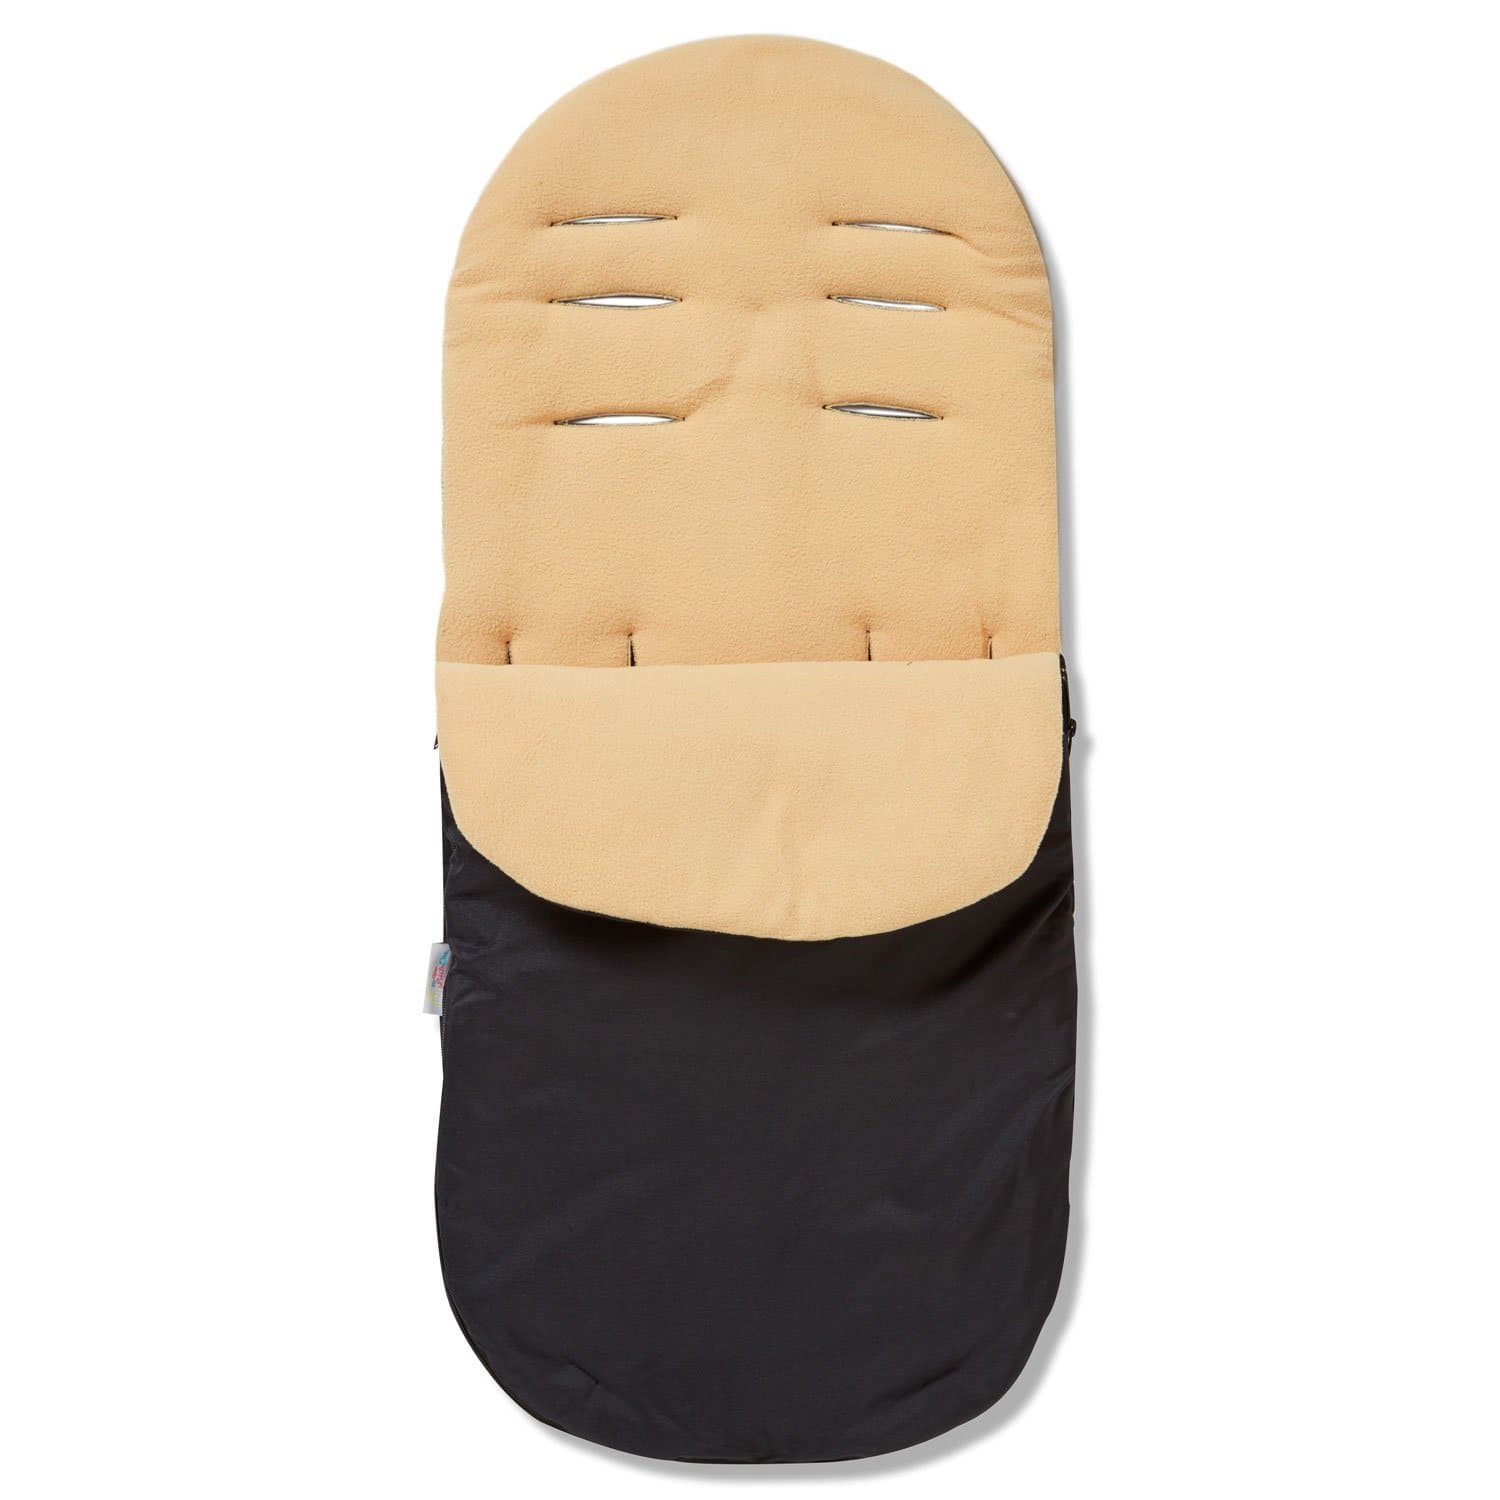 Footmuff / Cosy Toes Compatible with Baby Jogger - Sand / Fits All Models | For Your Little One